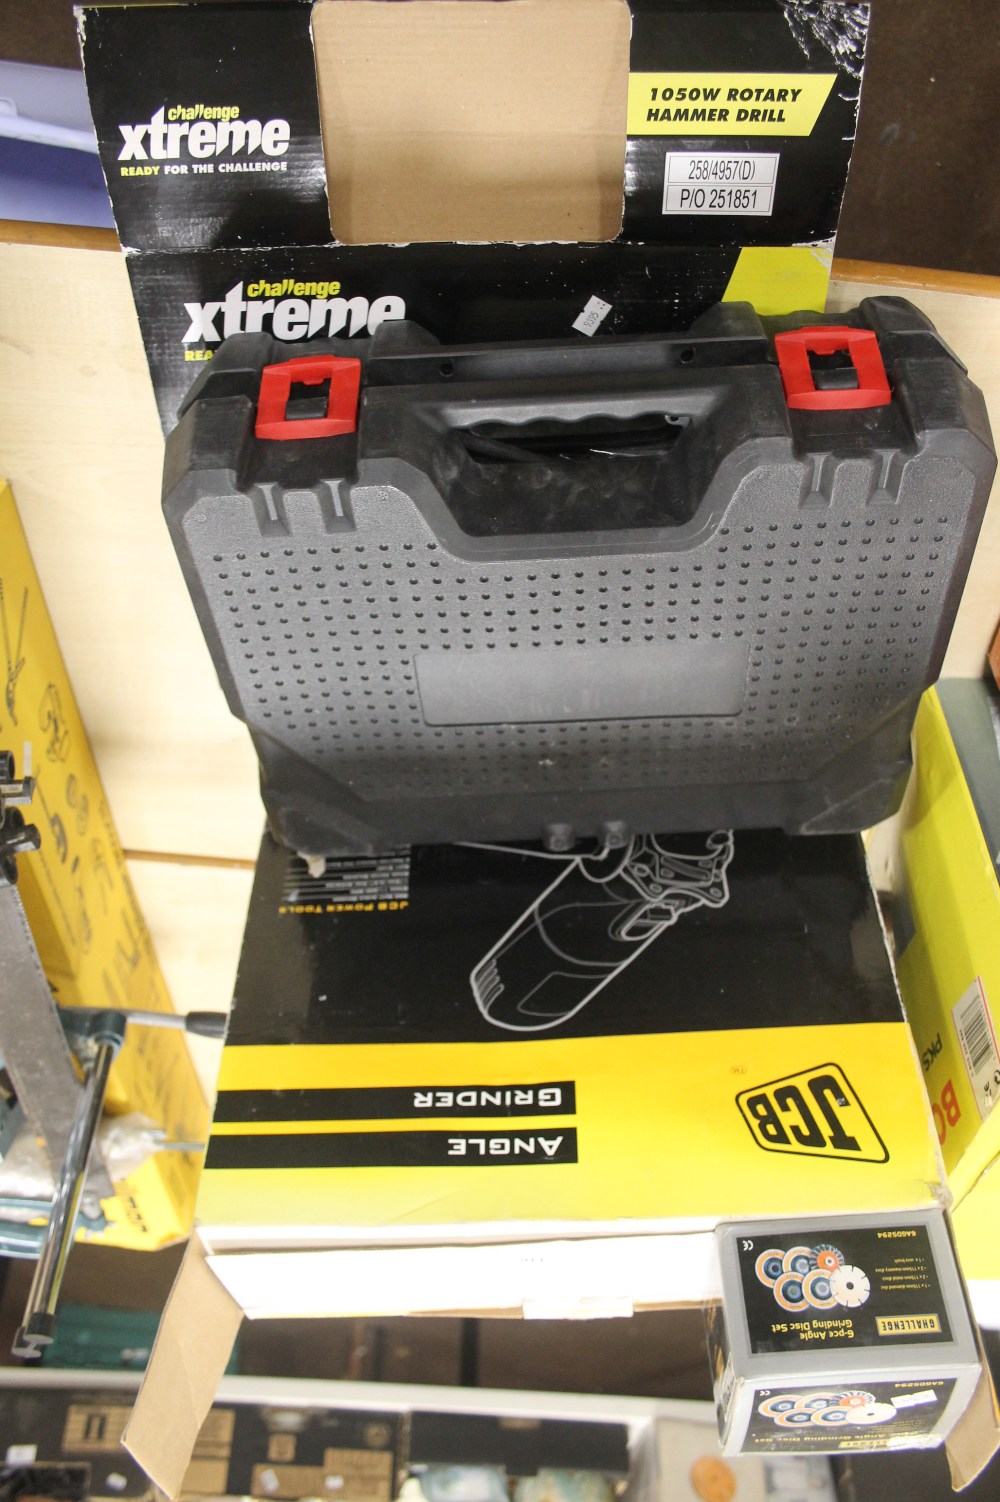 A CHALLENGE EXTREME 1050W ROTERY HAMMER DRILL TOGETHER WITH A JCB 860W ANGEL GRINDER AND SIX PIECE